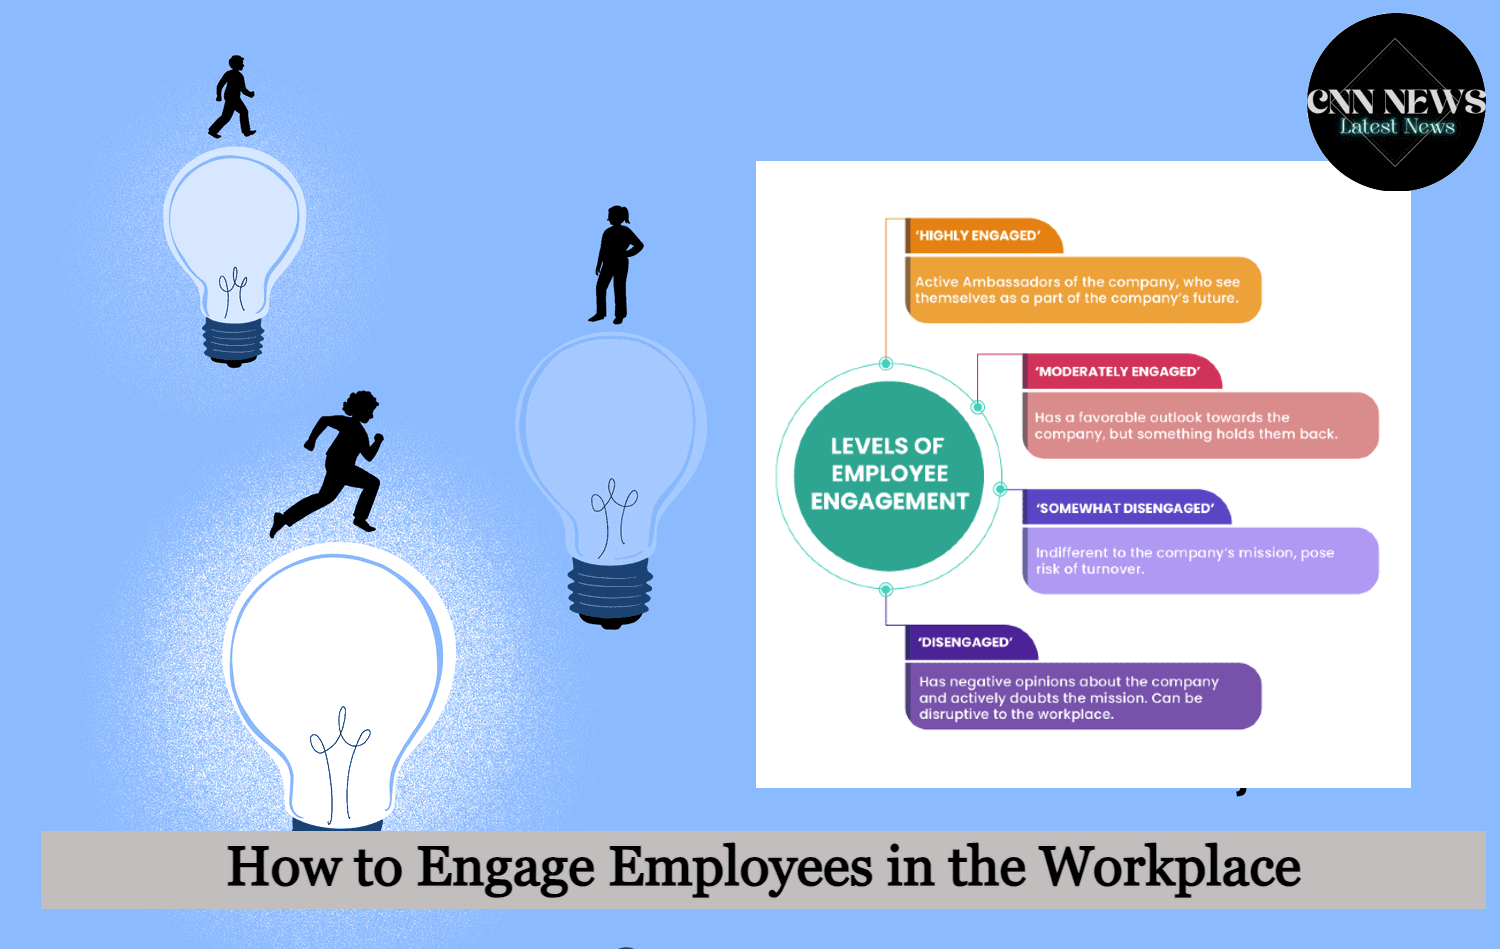 How to Engage Employees in the Workplace